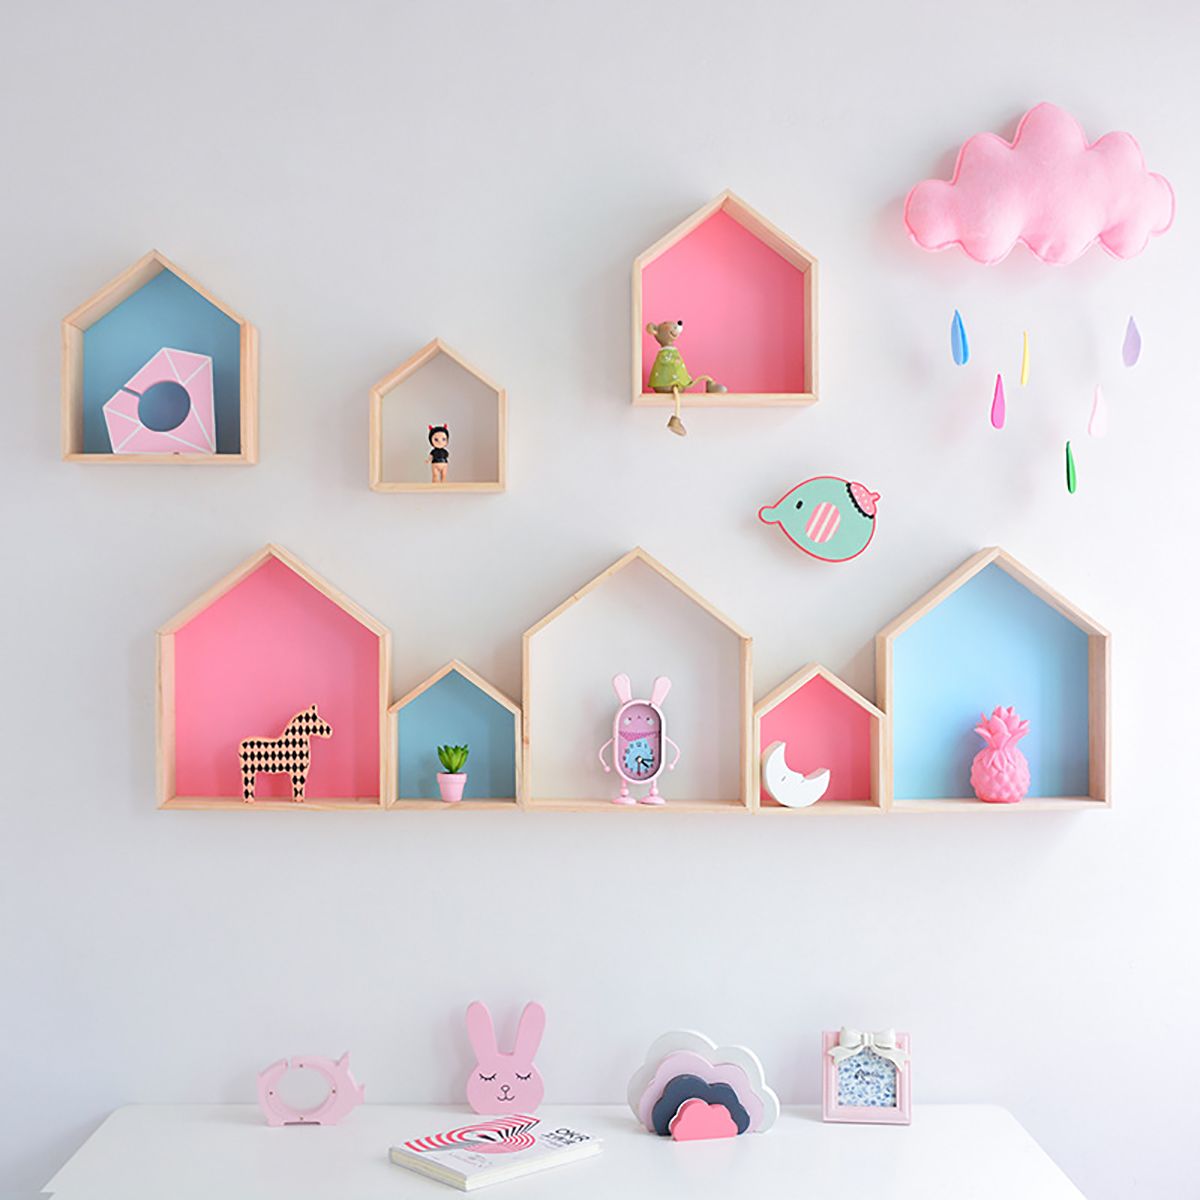 Wooden-House-Shape-Wall-Hanging-Shelf-Toy-Storage-Rack-Home-Decorations-1596614